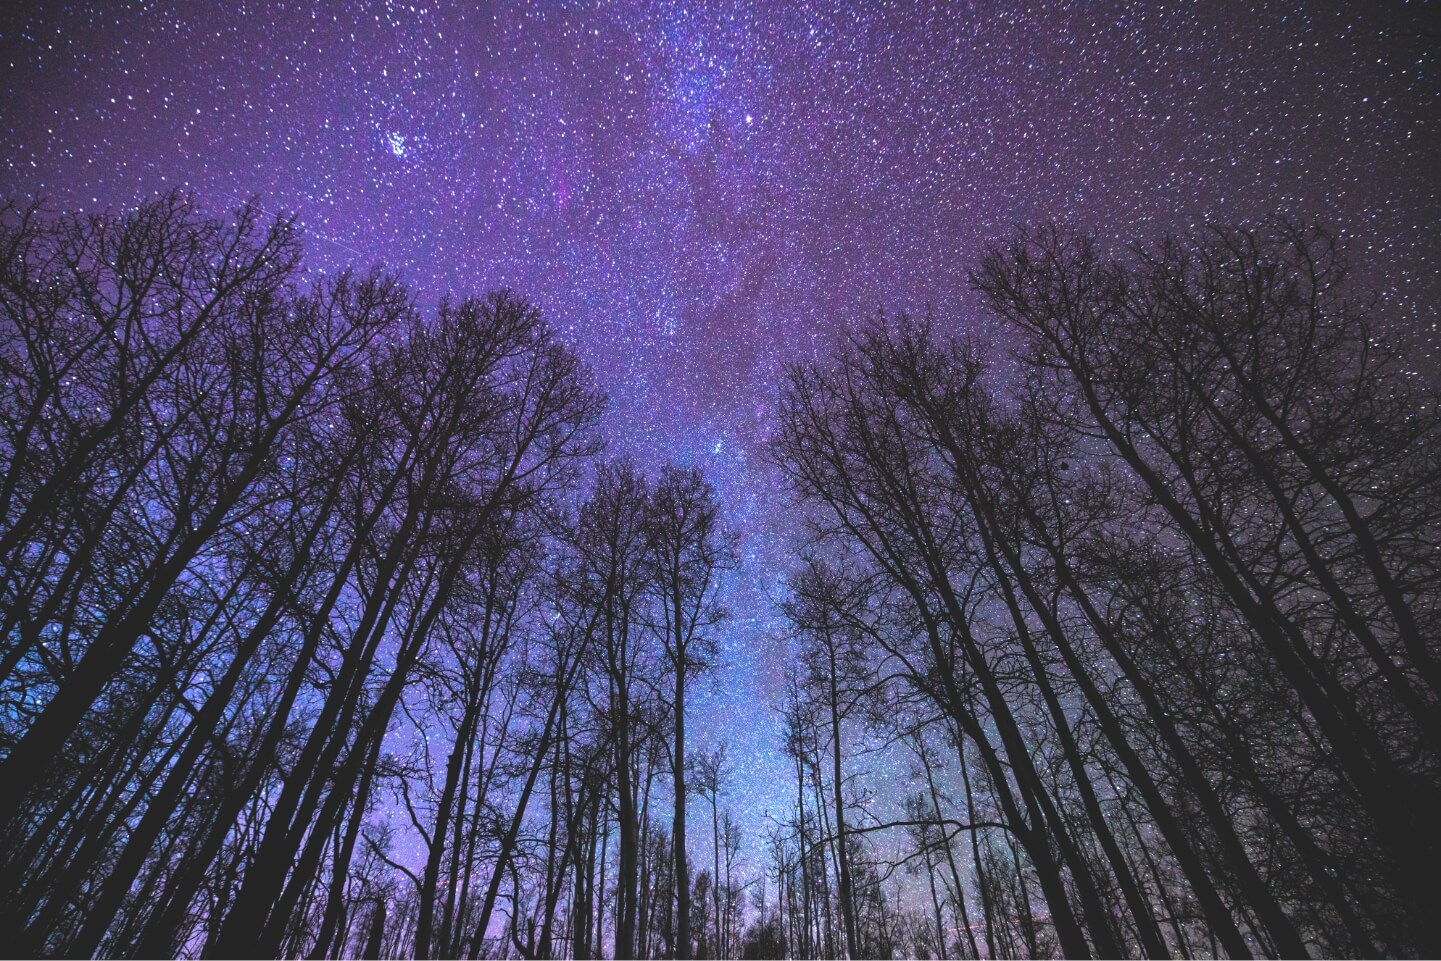 Trees and nighttime sky